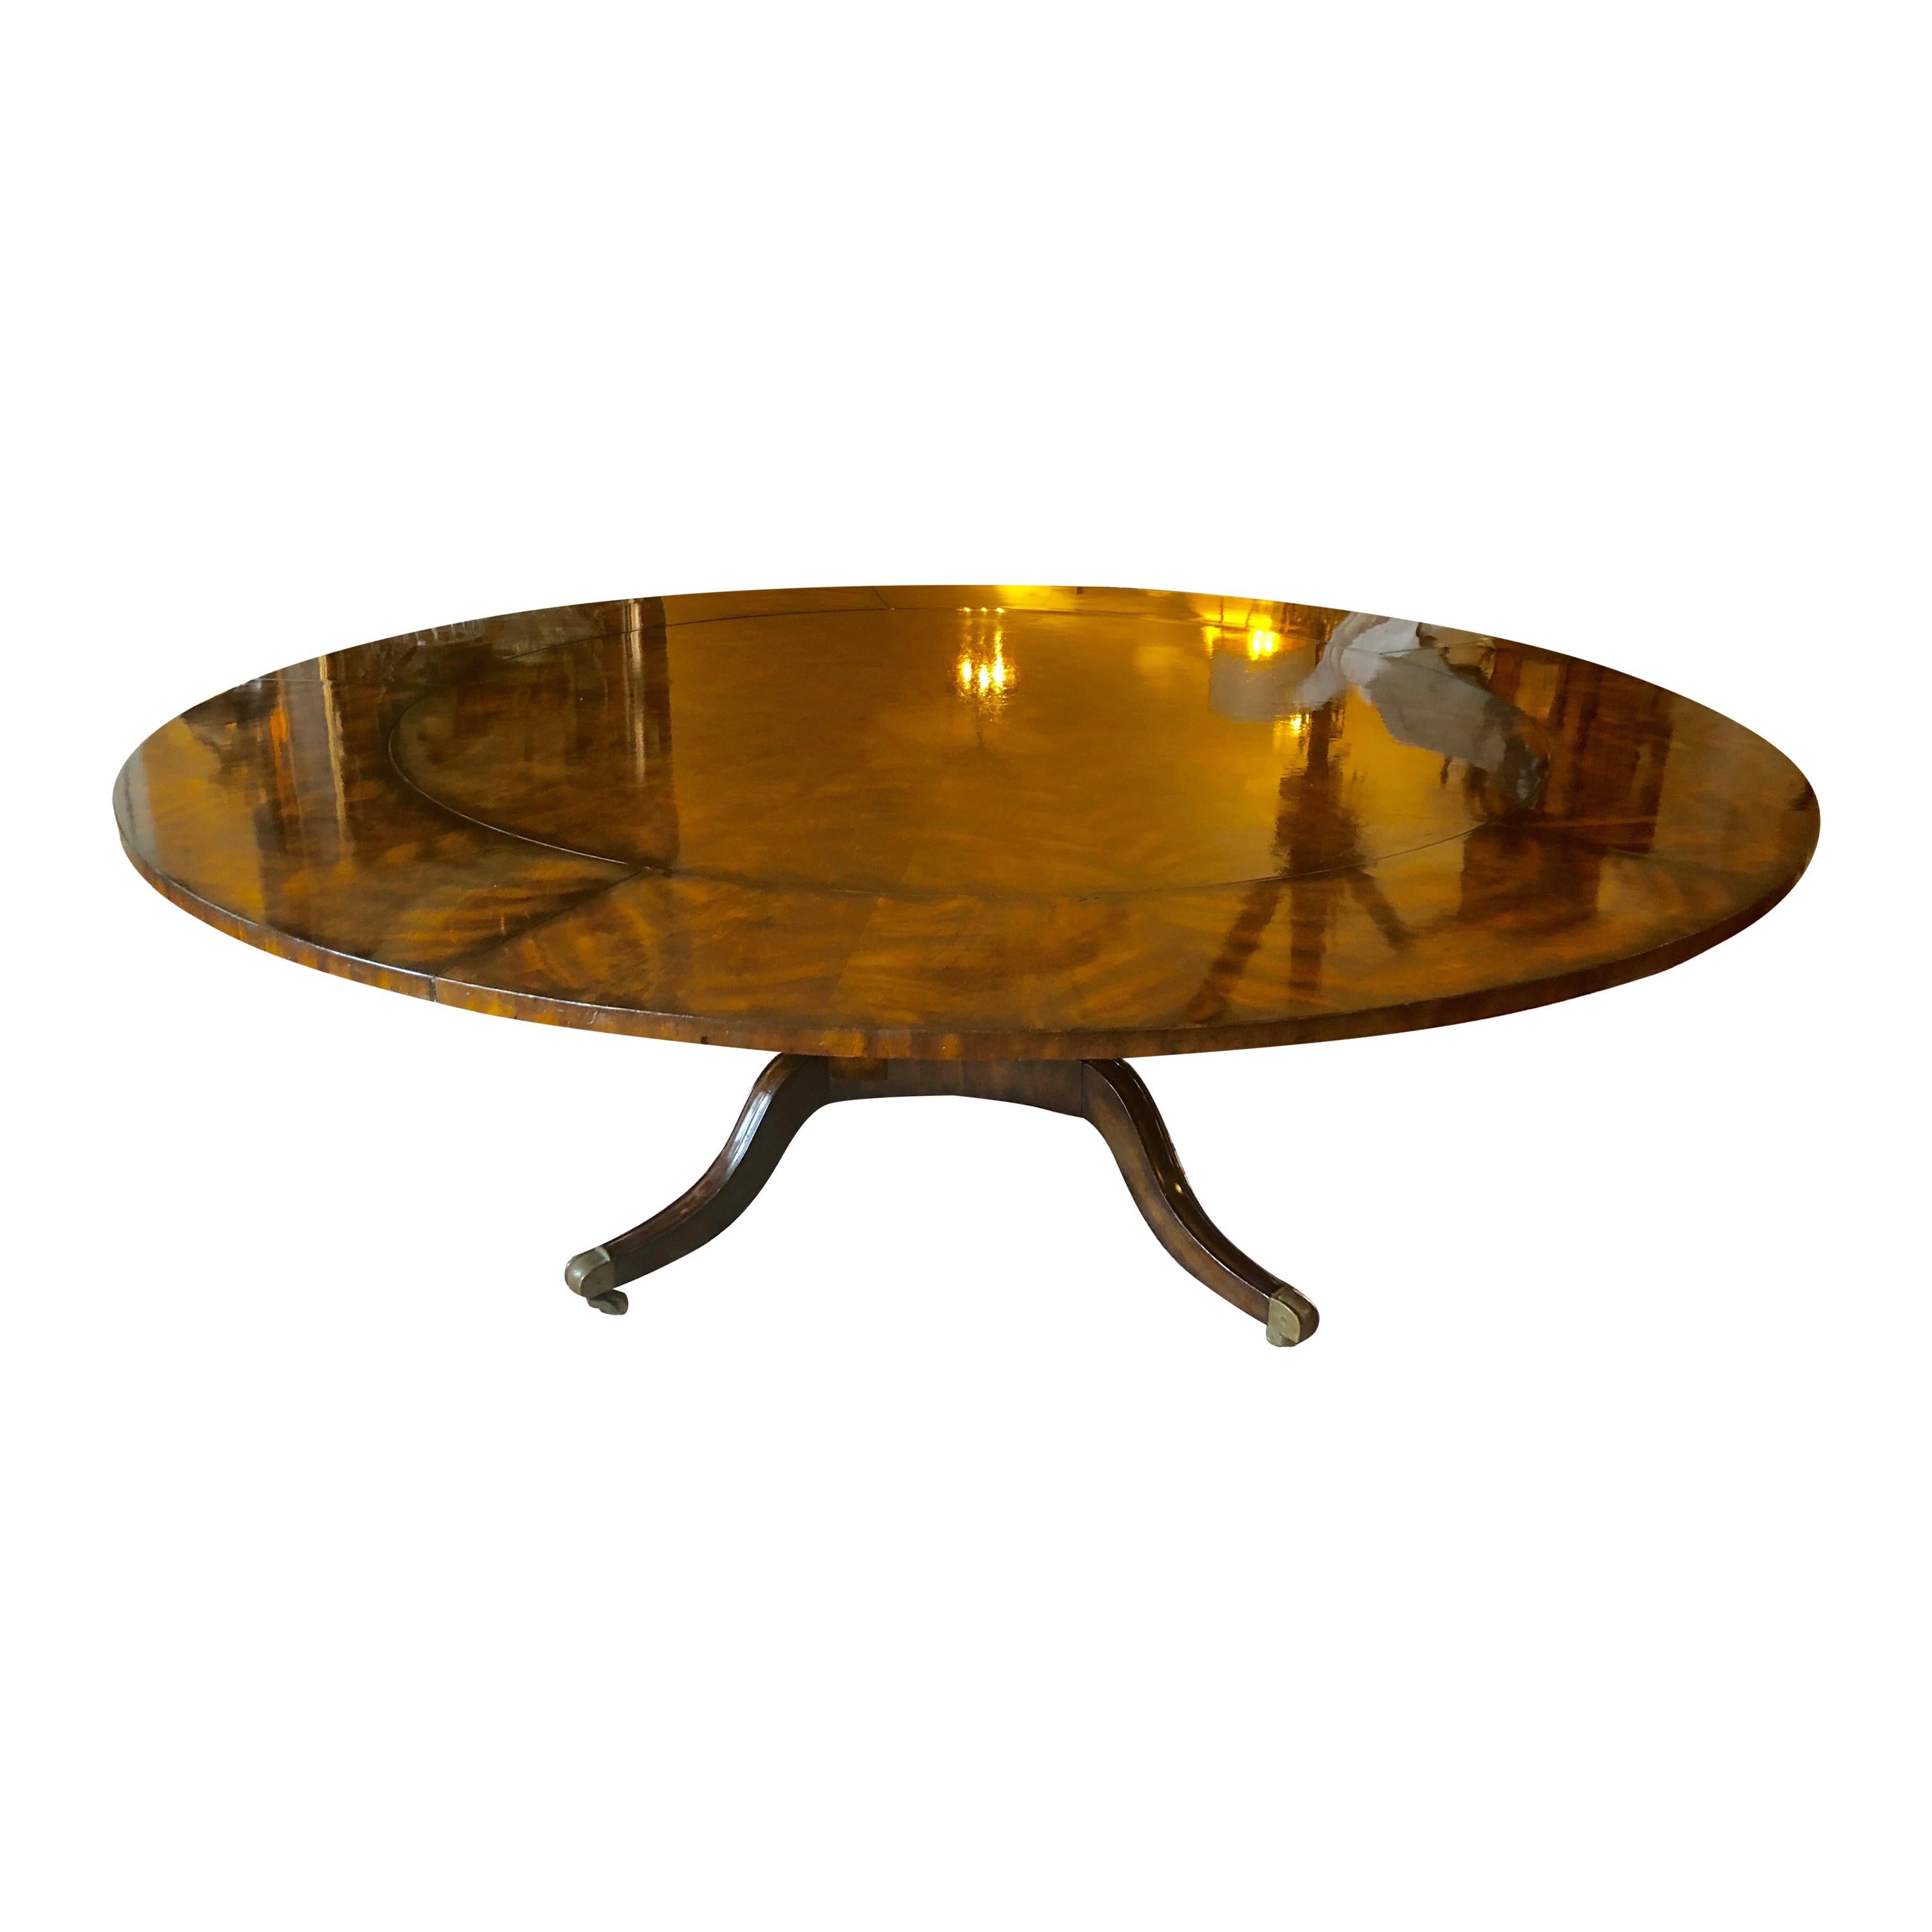 Monumental Large Round Crotch Mahogany Dining Table with Peripheral Leaves